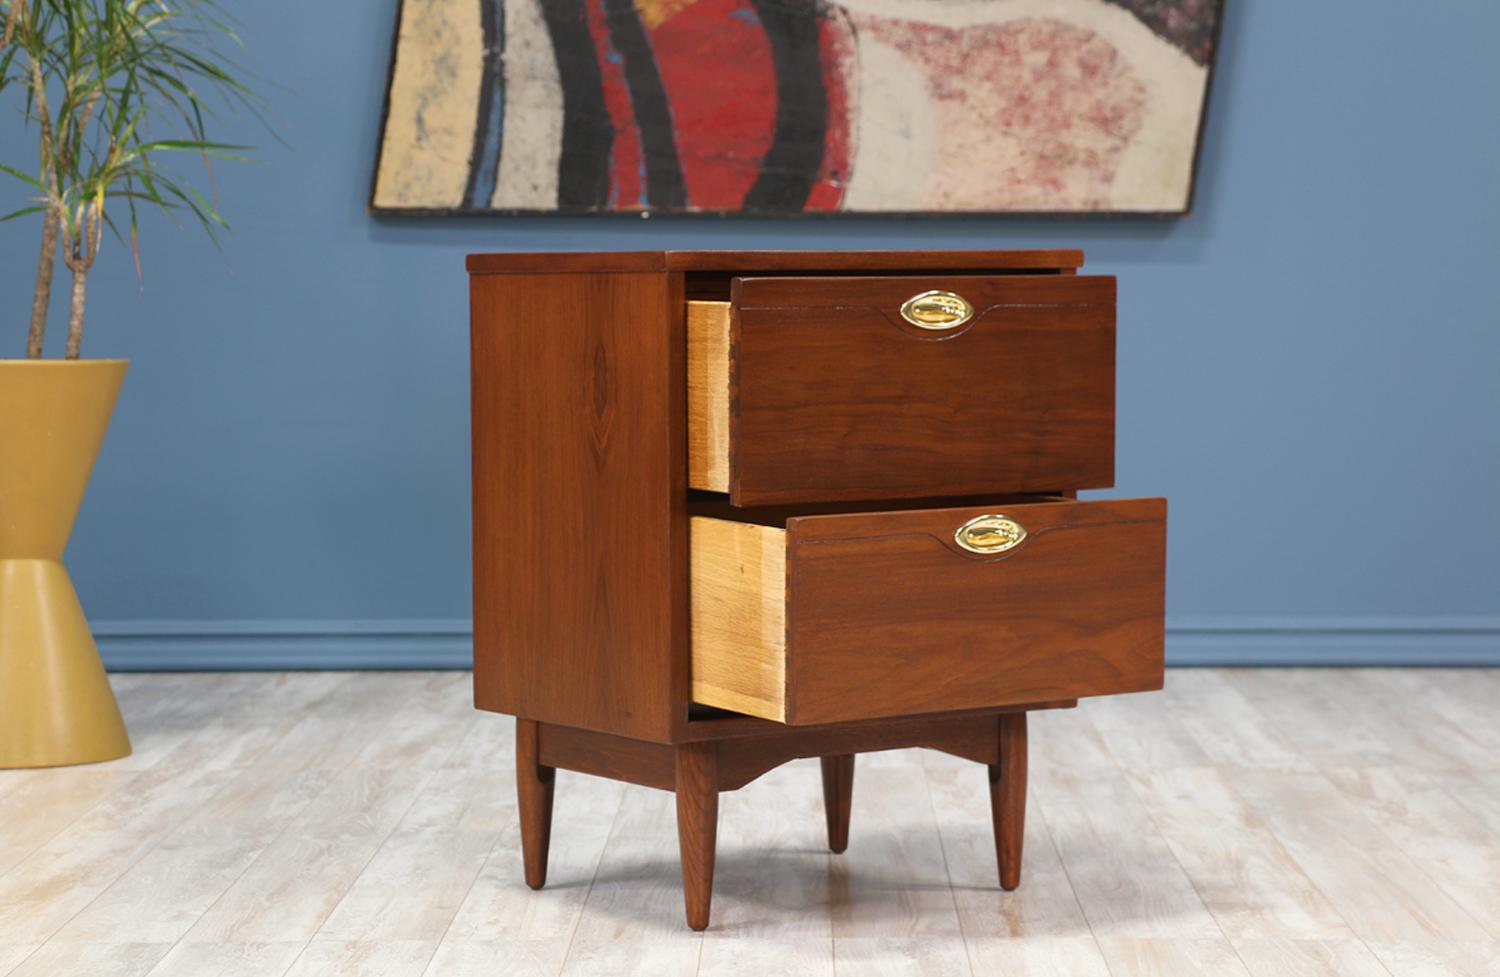 Polished Midcentury “Mainline” Nightstands by Hooker